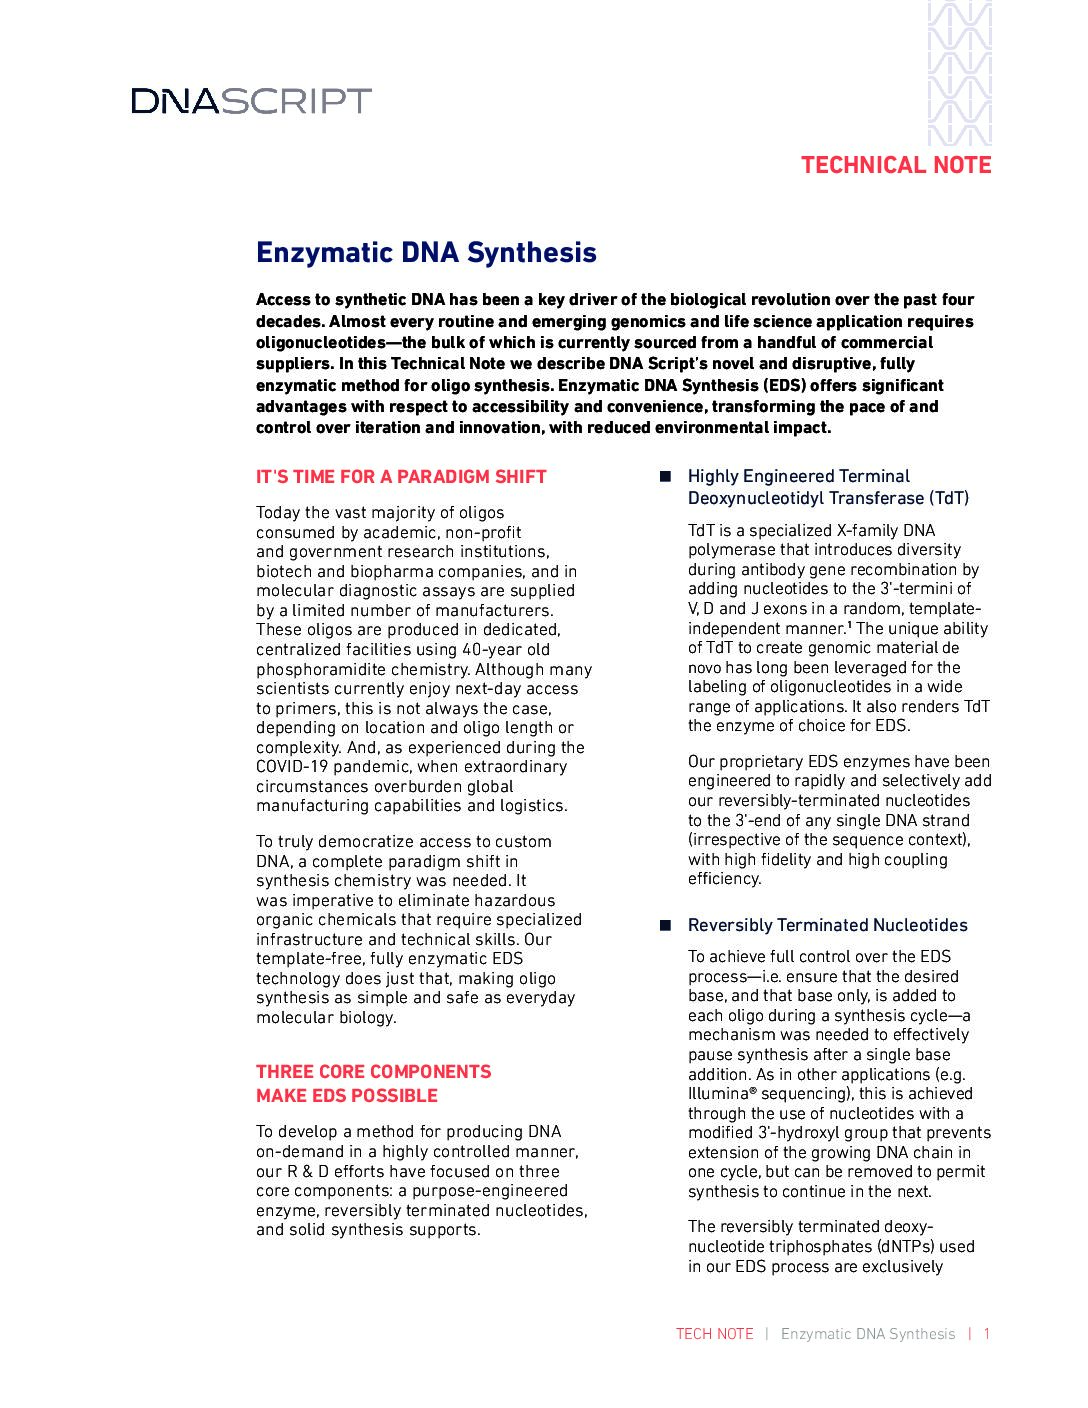 Enzymatic DNA Synthesis Technical Note